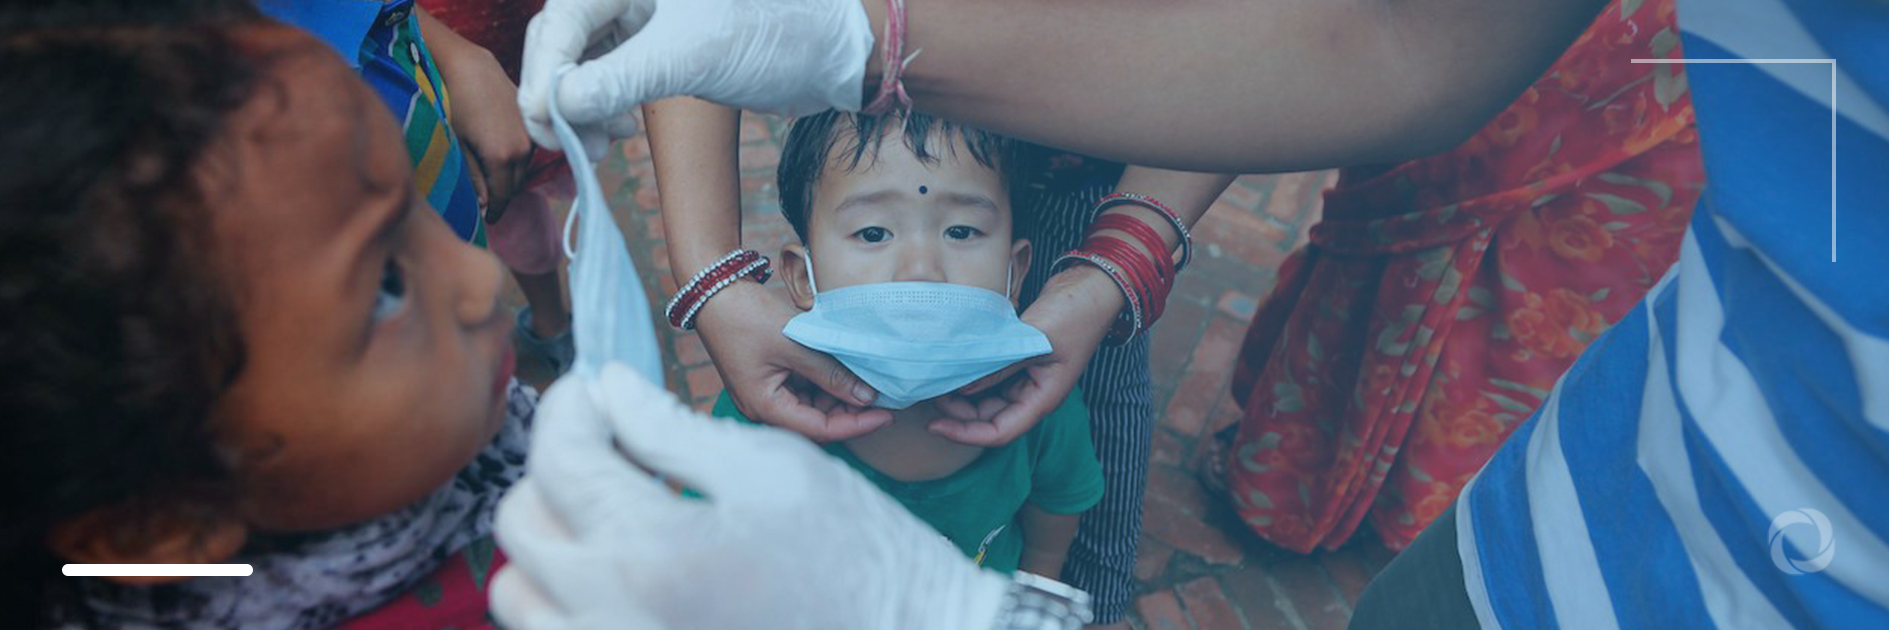 Study finds COVID-19 has had a devastating impact on children's health and migration in South Asia